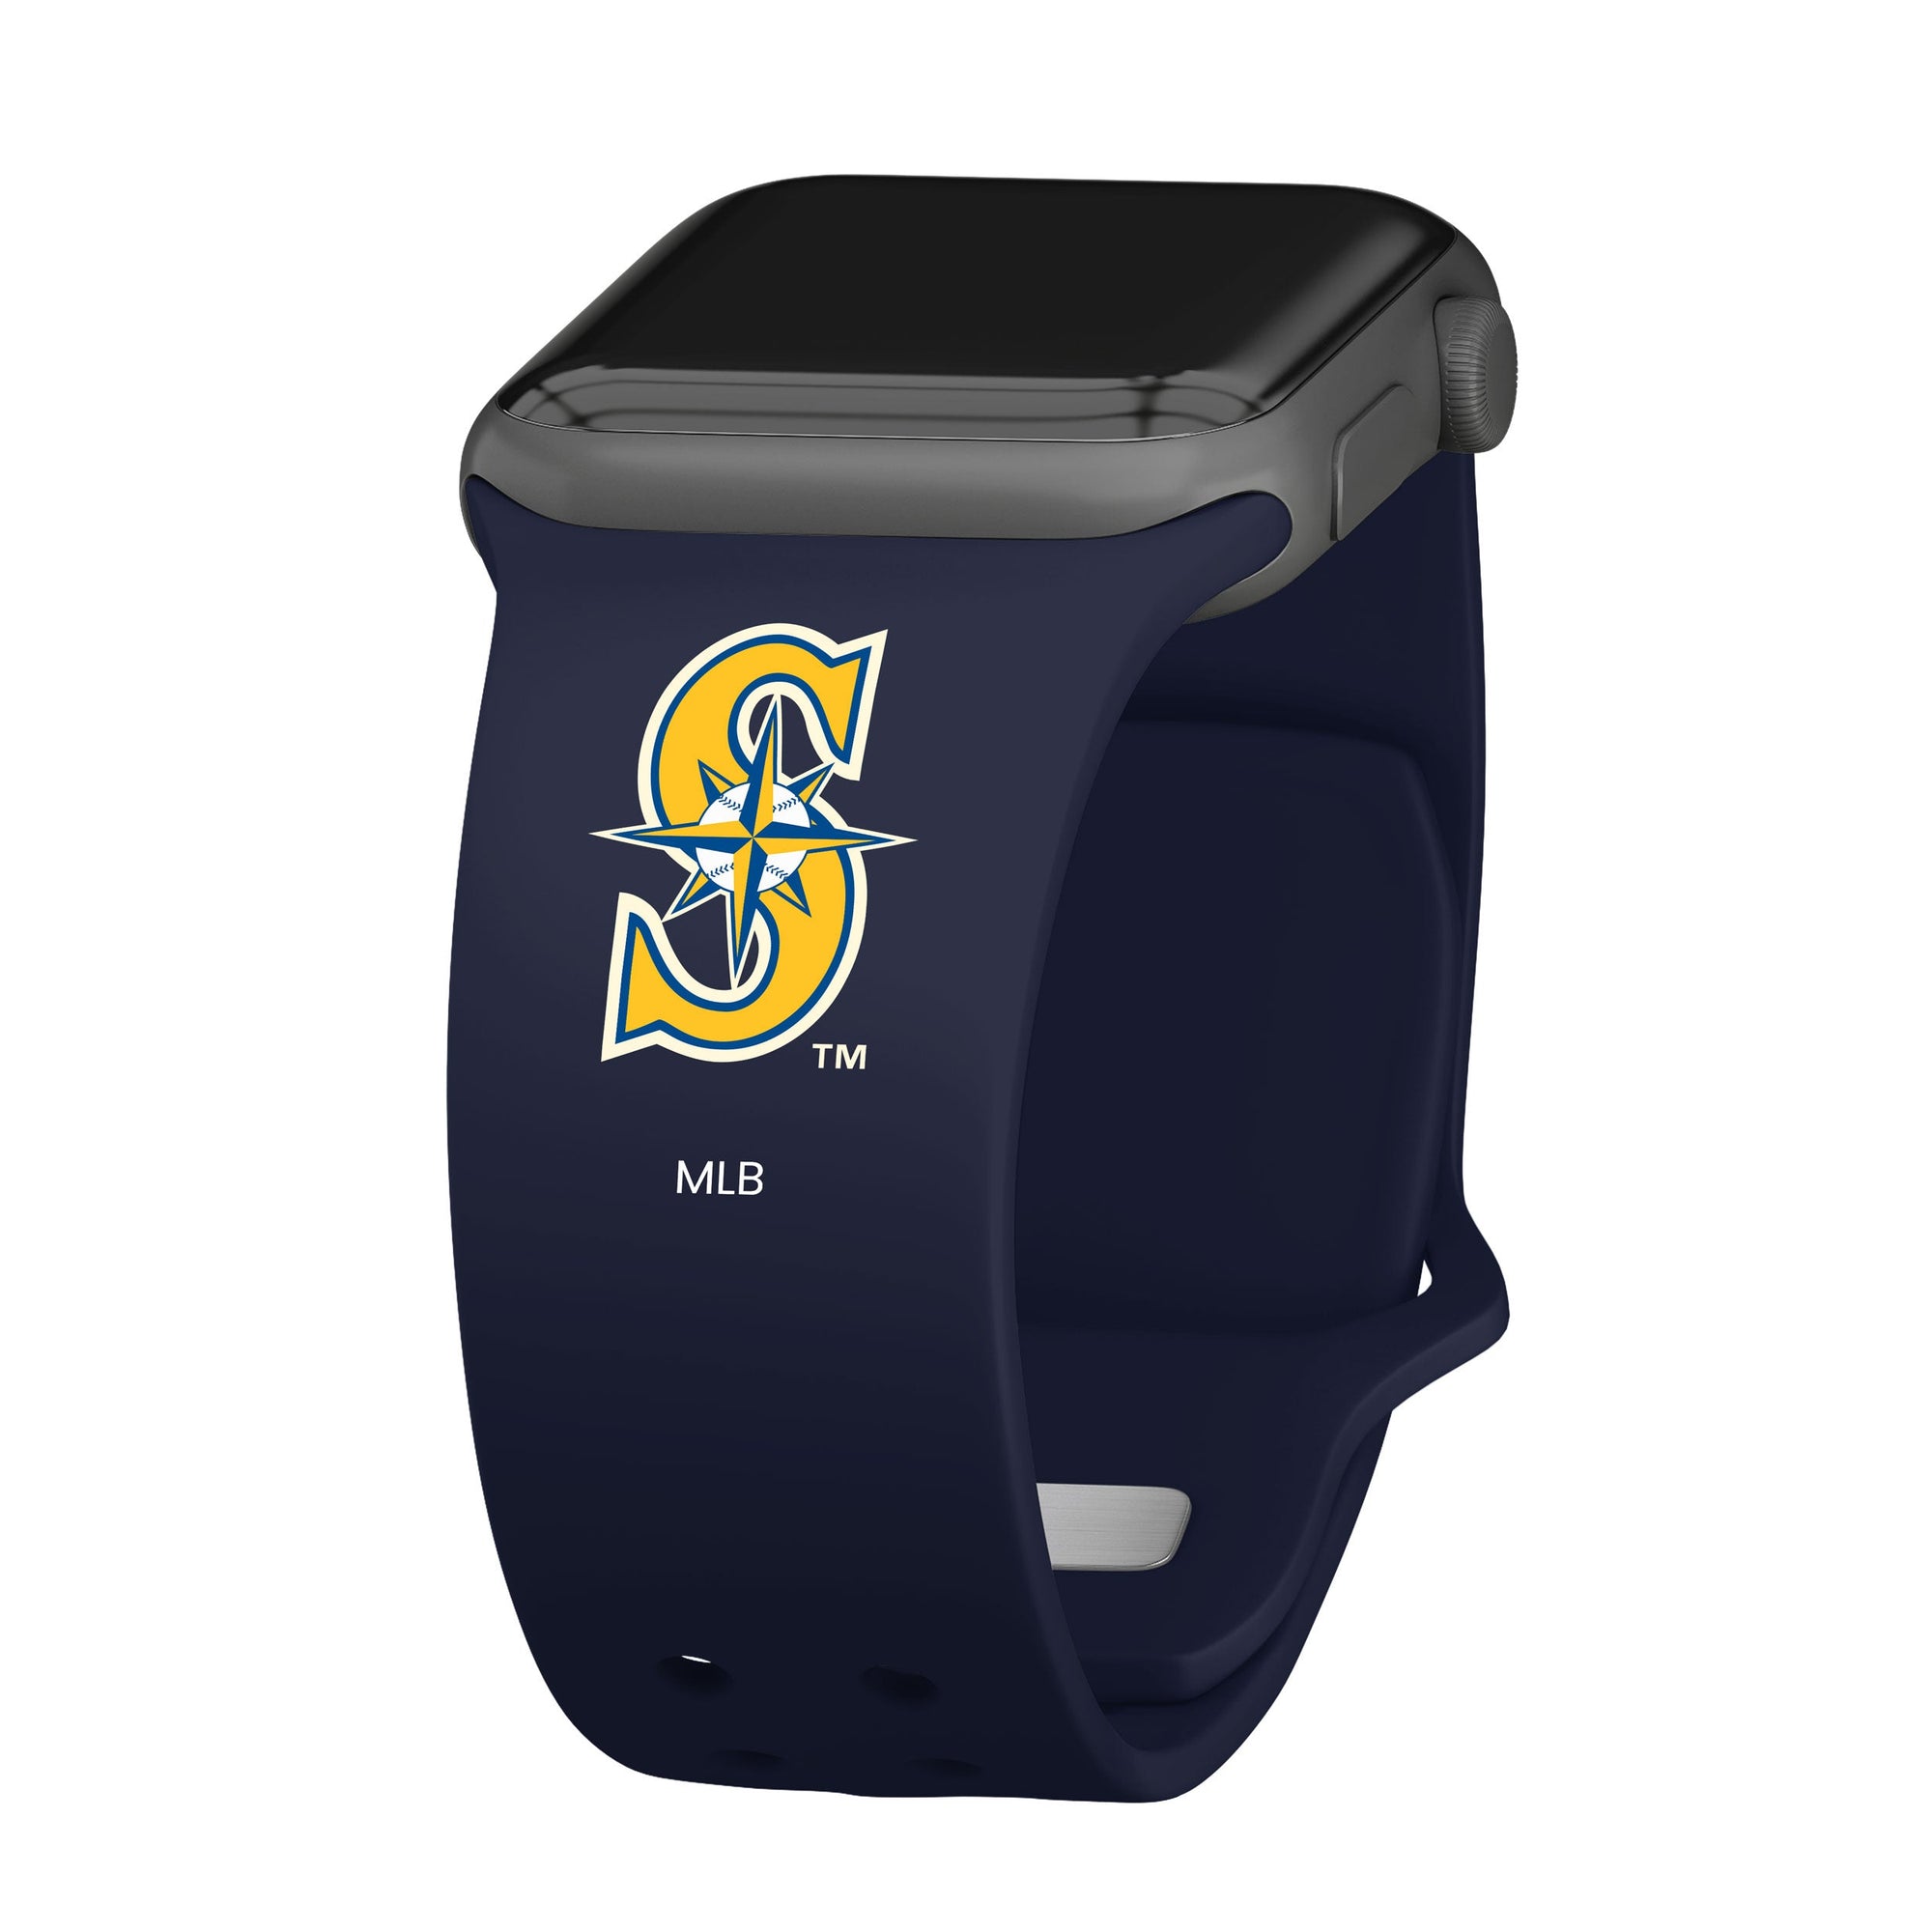 Seattle Mariners HD Elite Edition Apple Watch Band